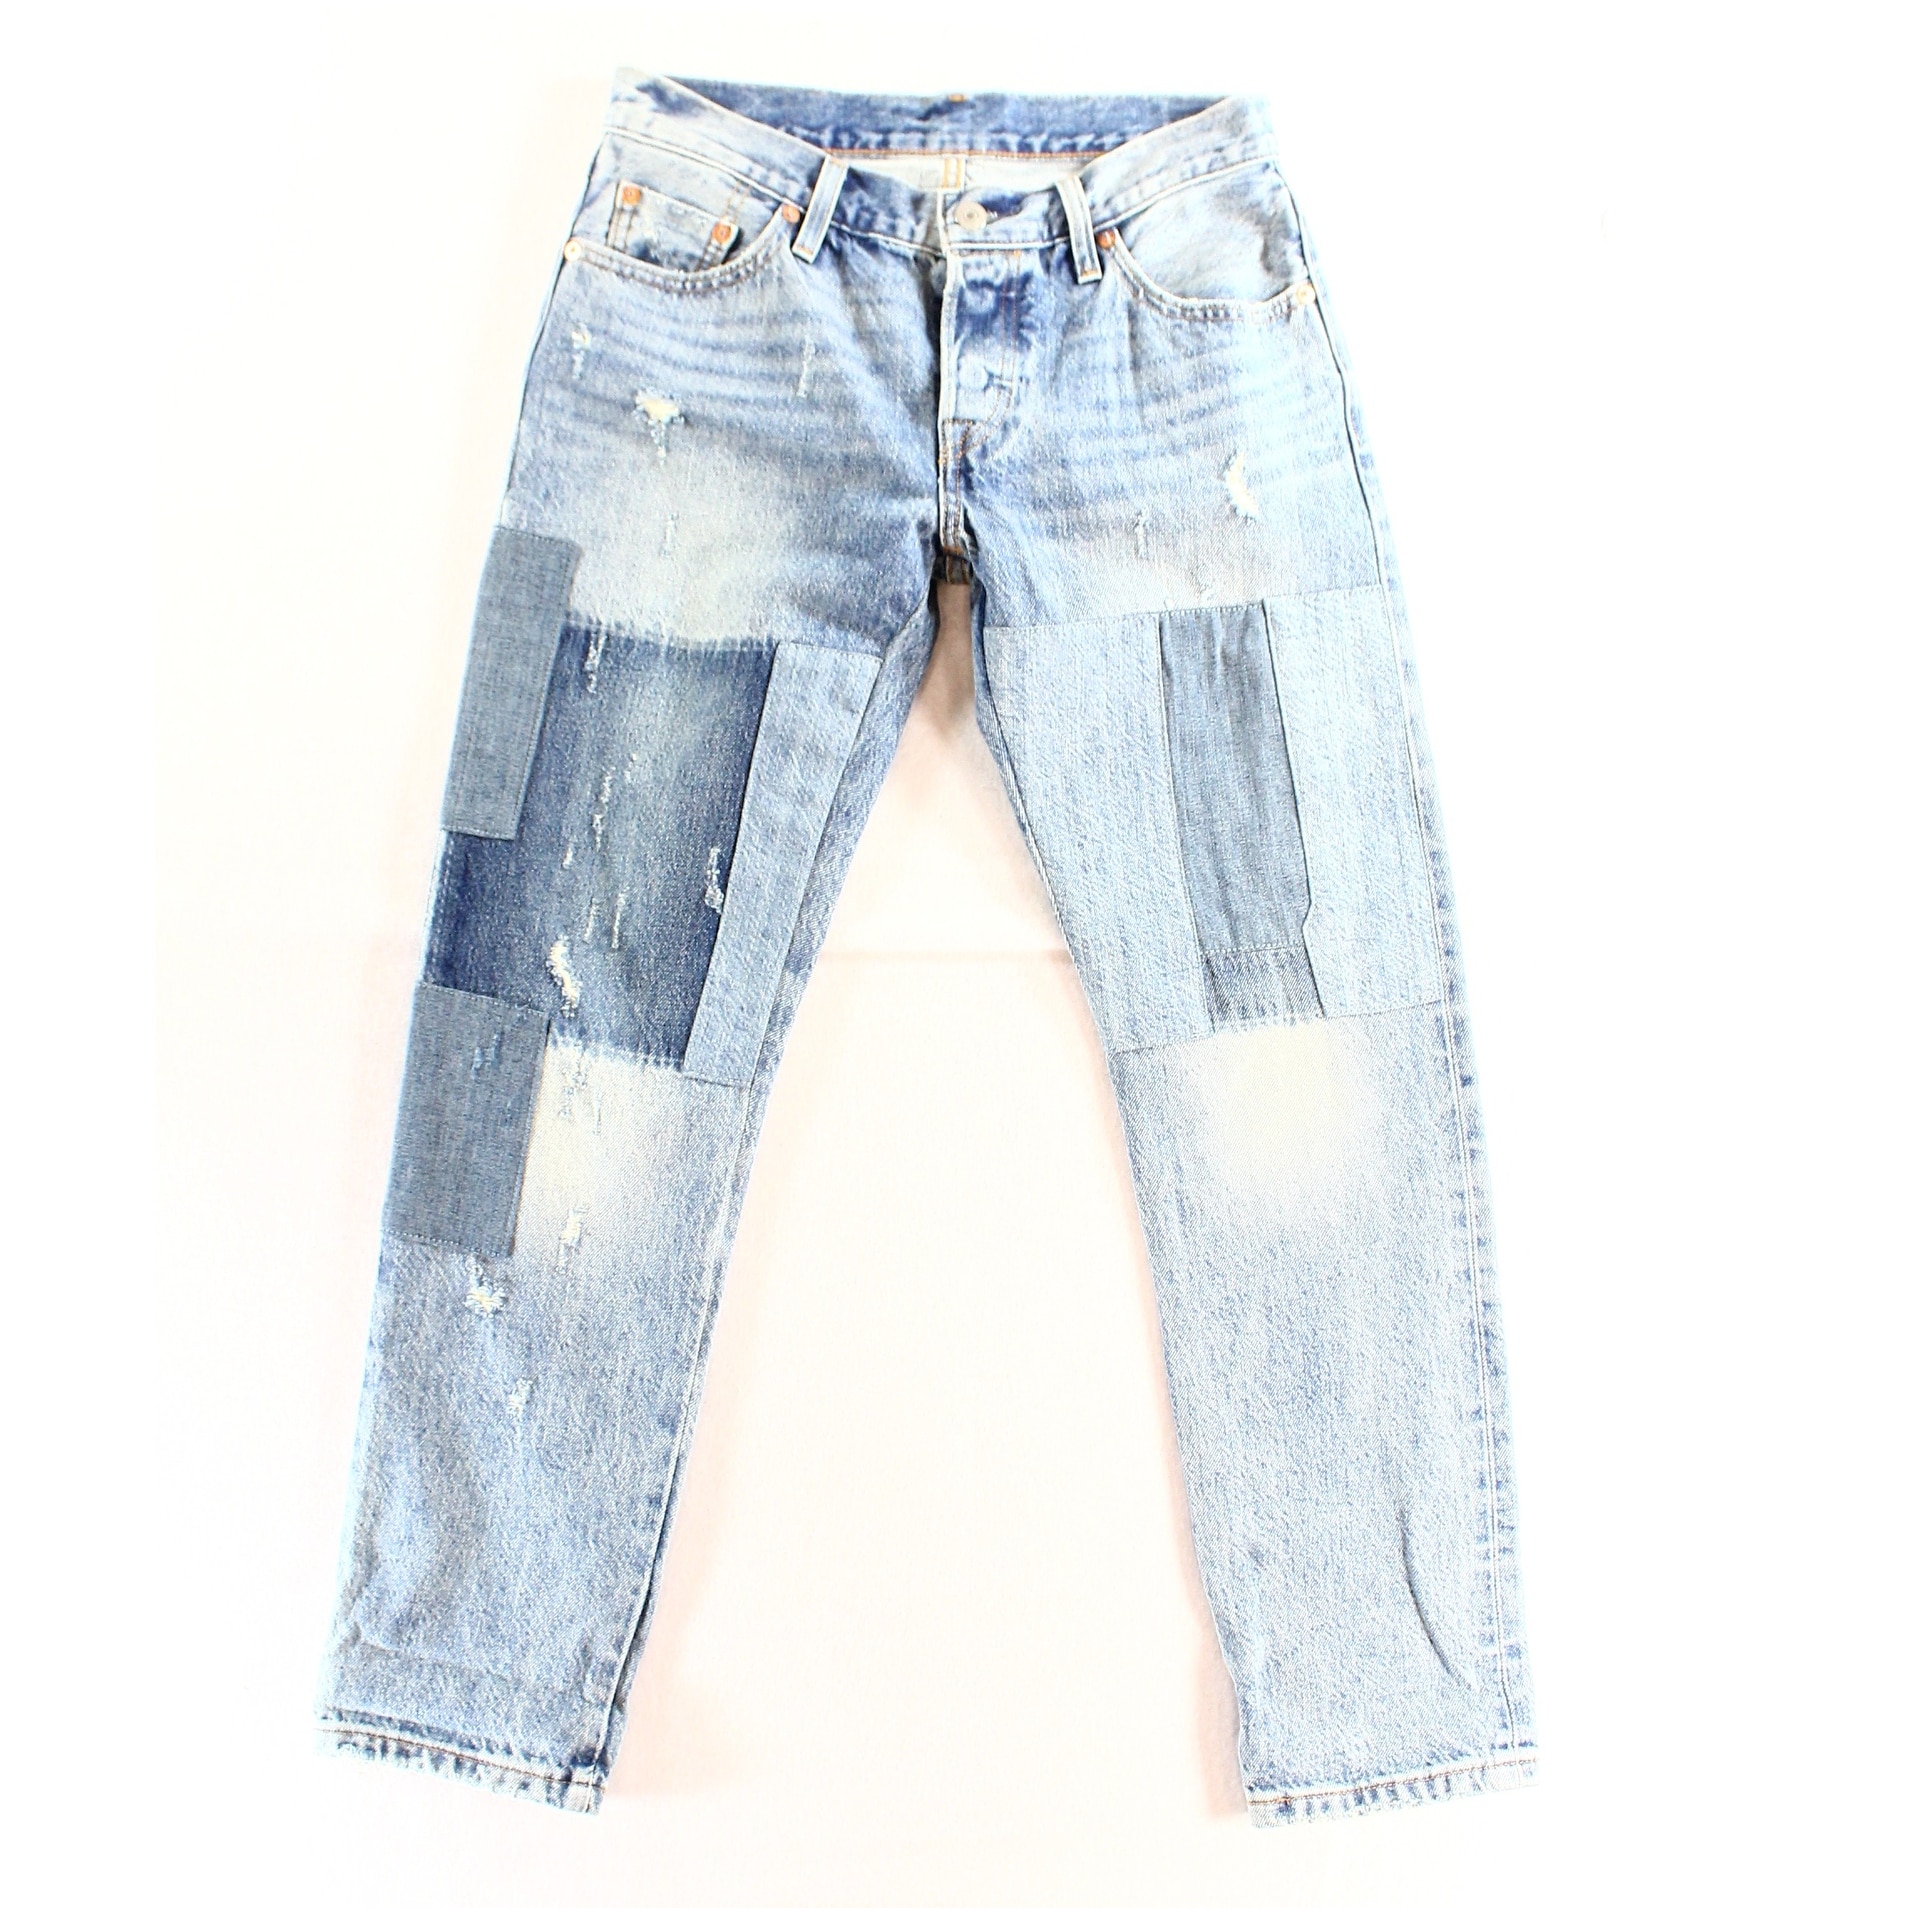 levi's 501 customized and tapered jean